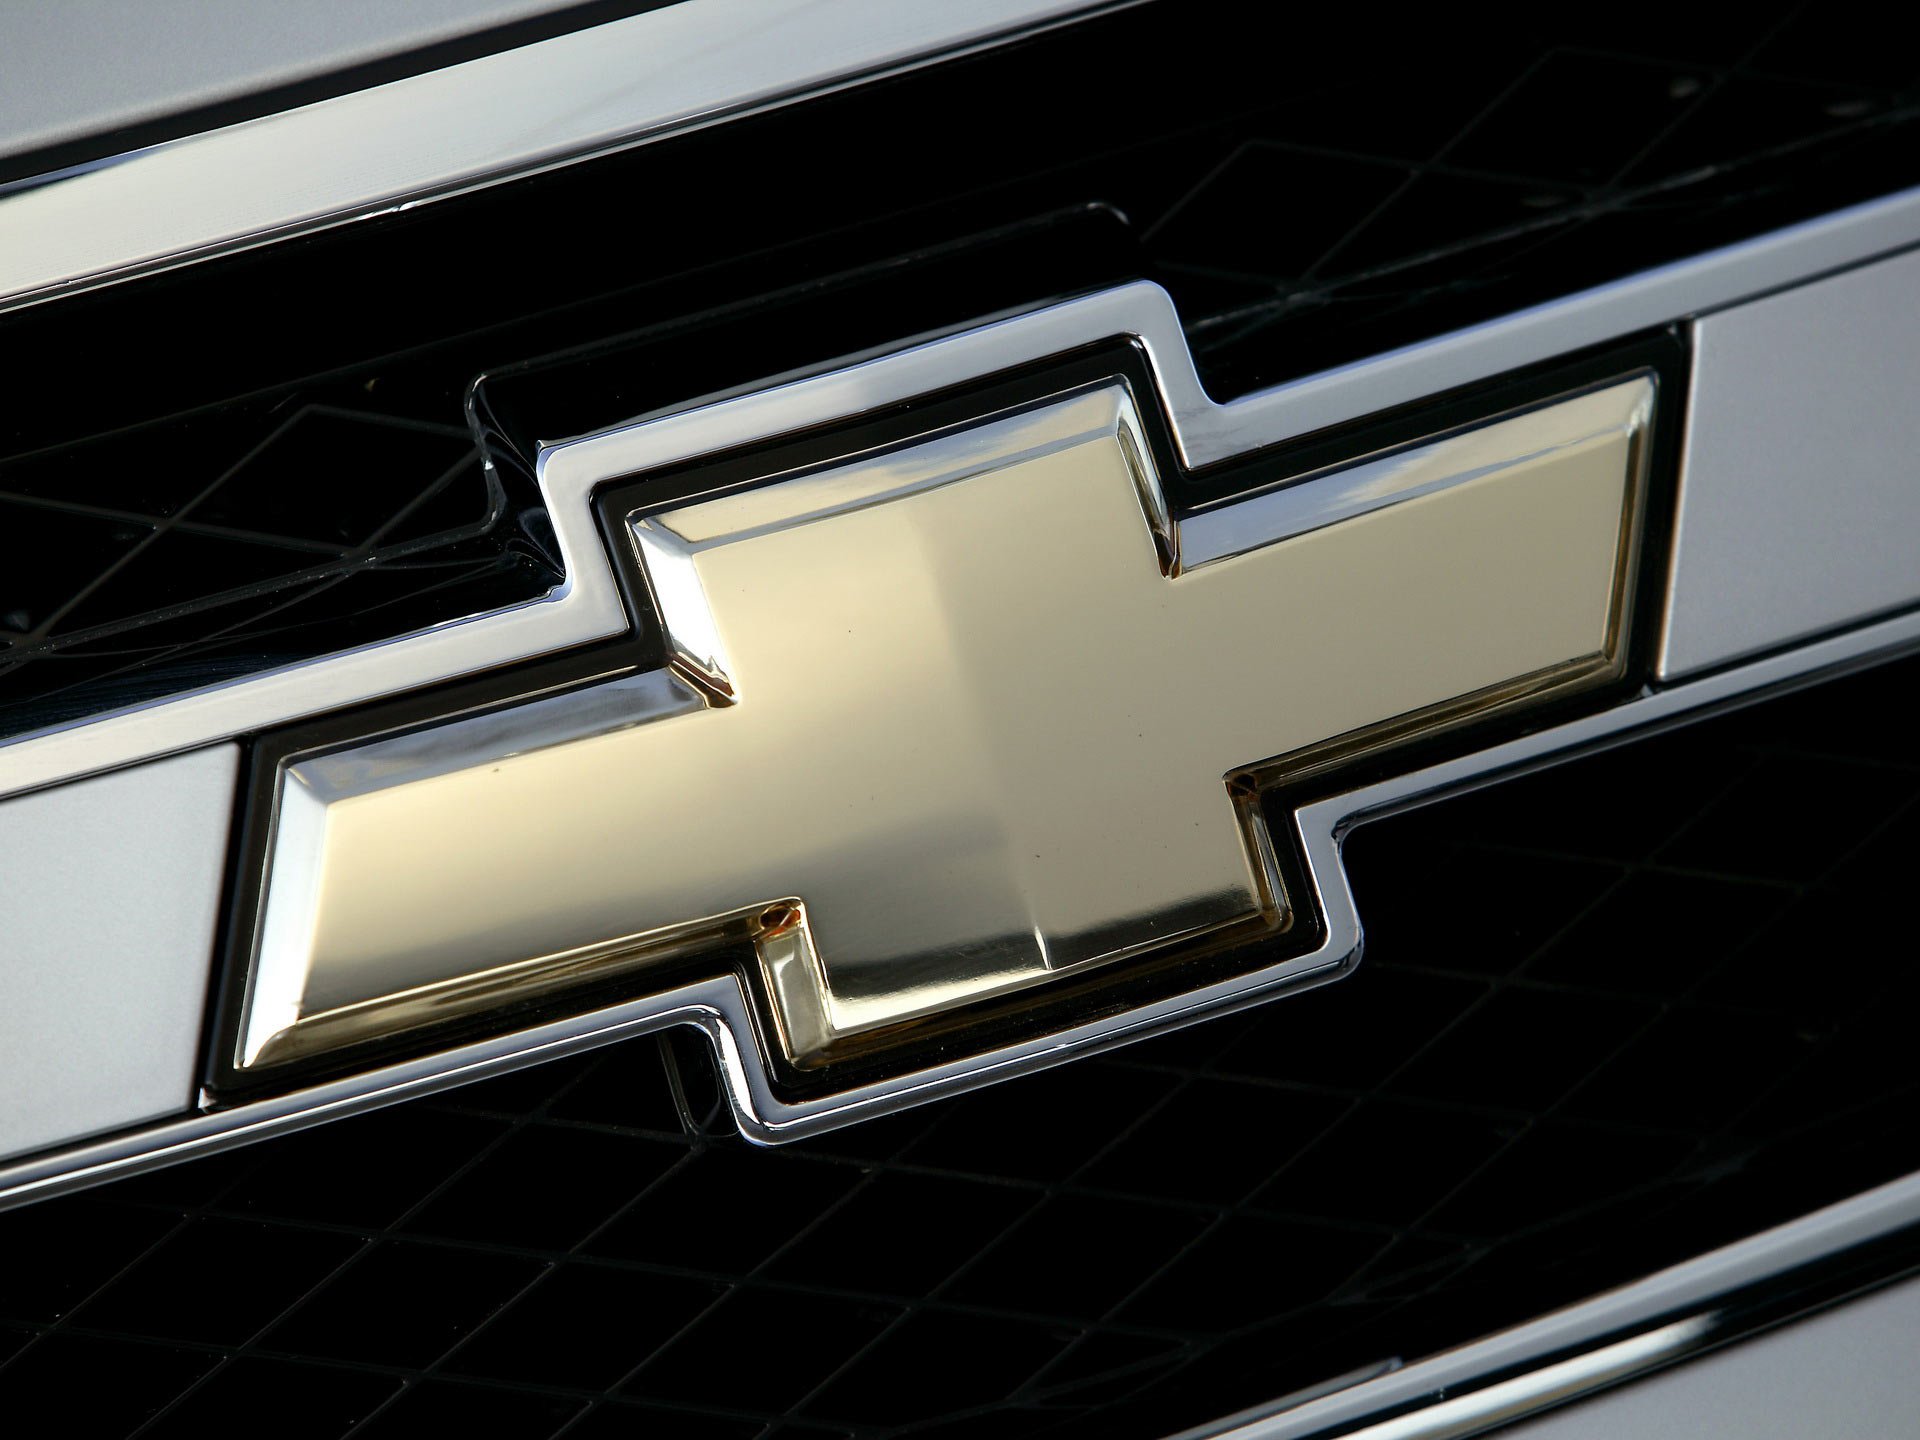 Chevy Logo Wallpaper 4377 Hd Wallpapers in Logos   Imagescicom